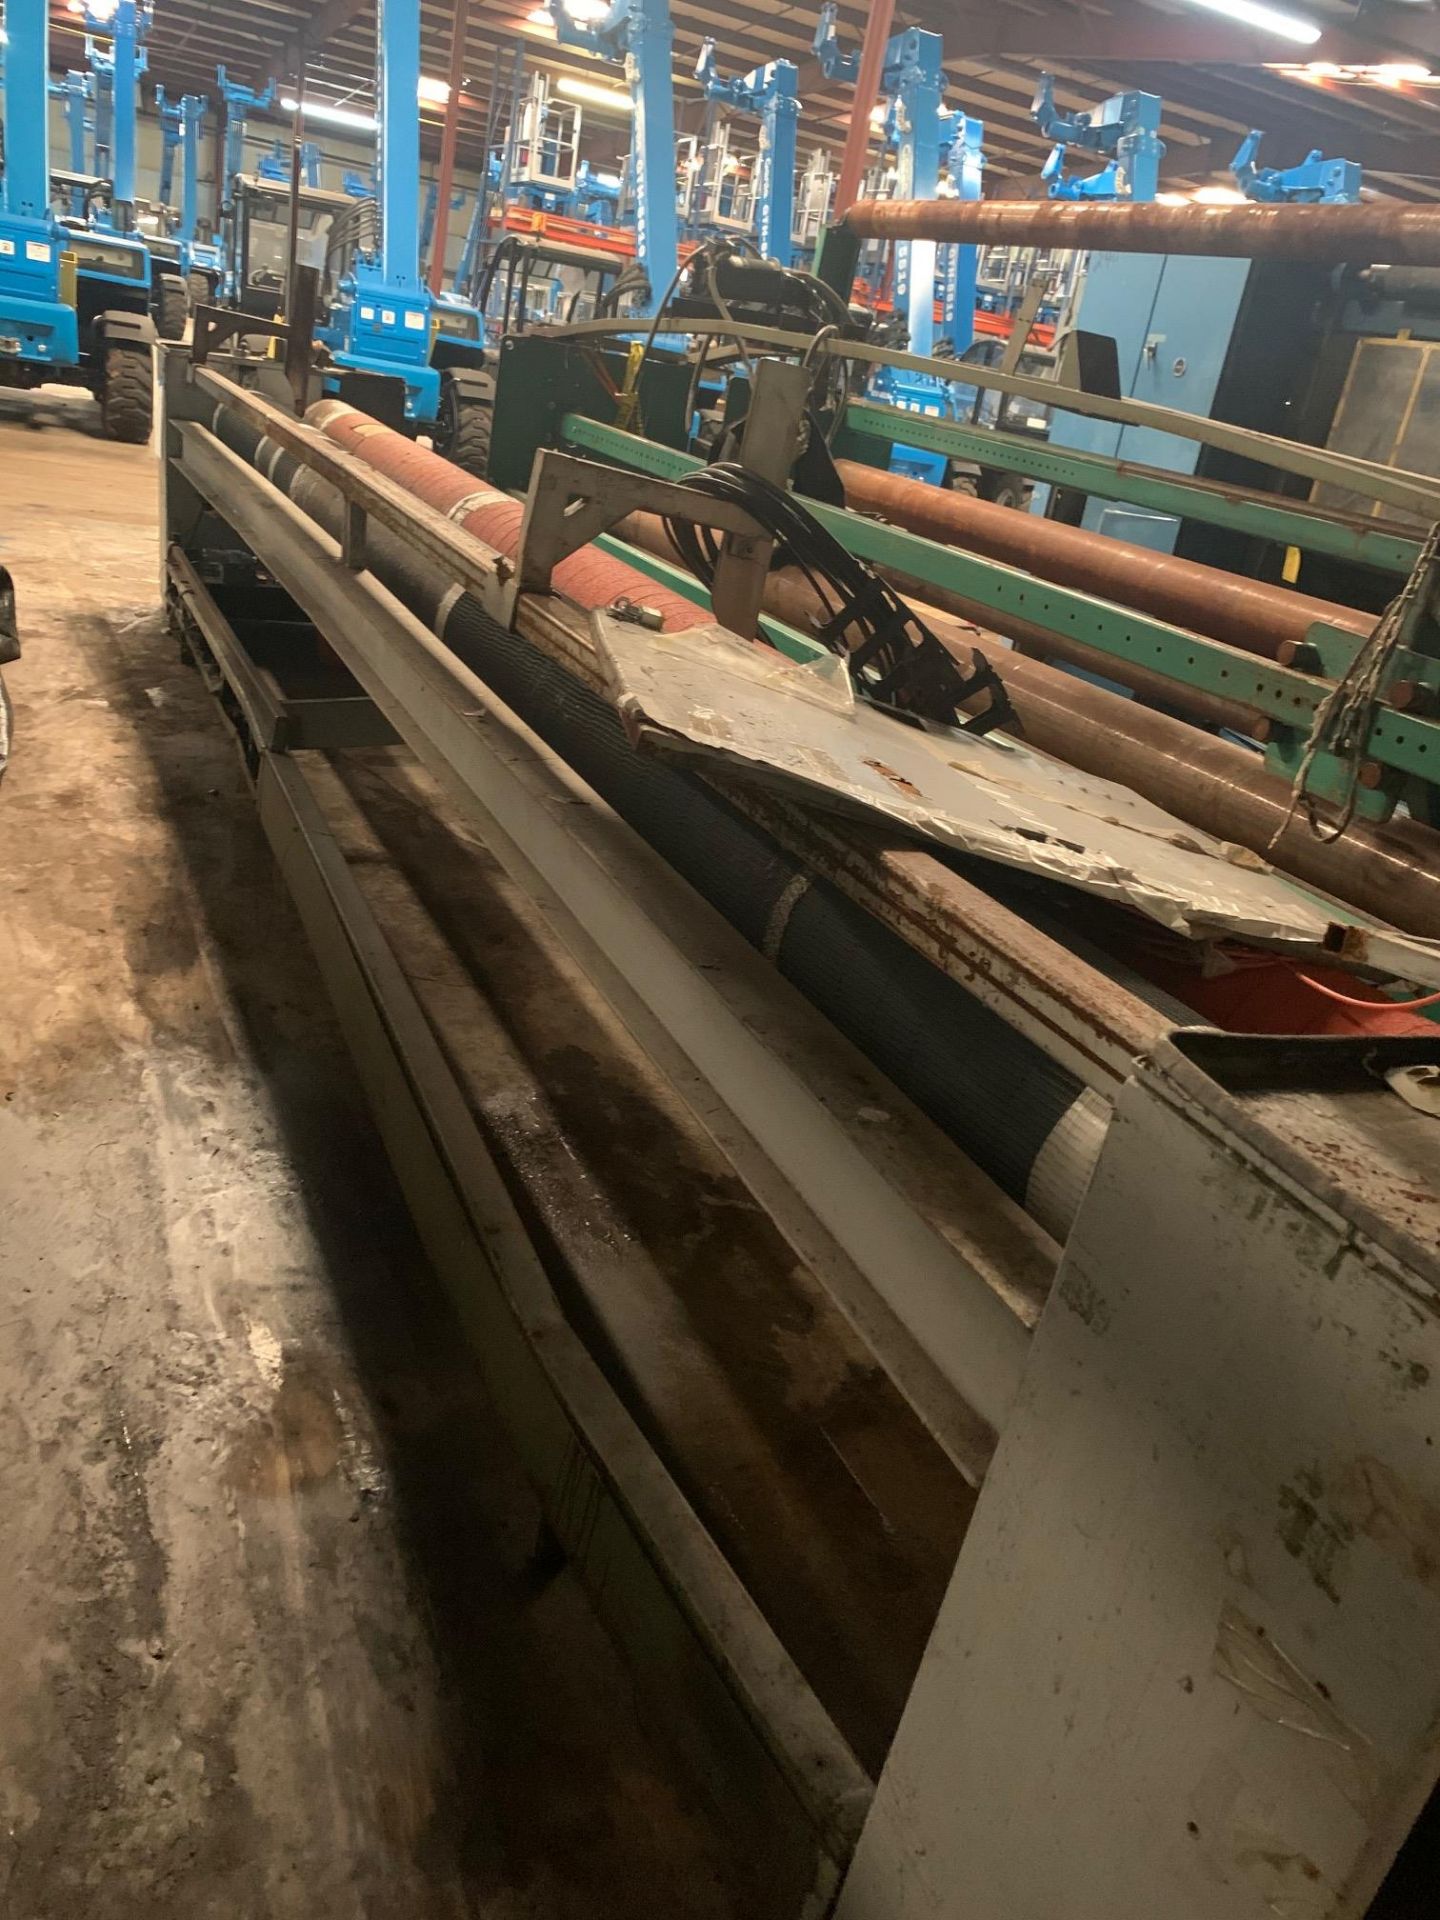 Roll Up Machine, Working Width 218", Rigging Fee $100 - Image 3 of 5